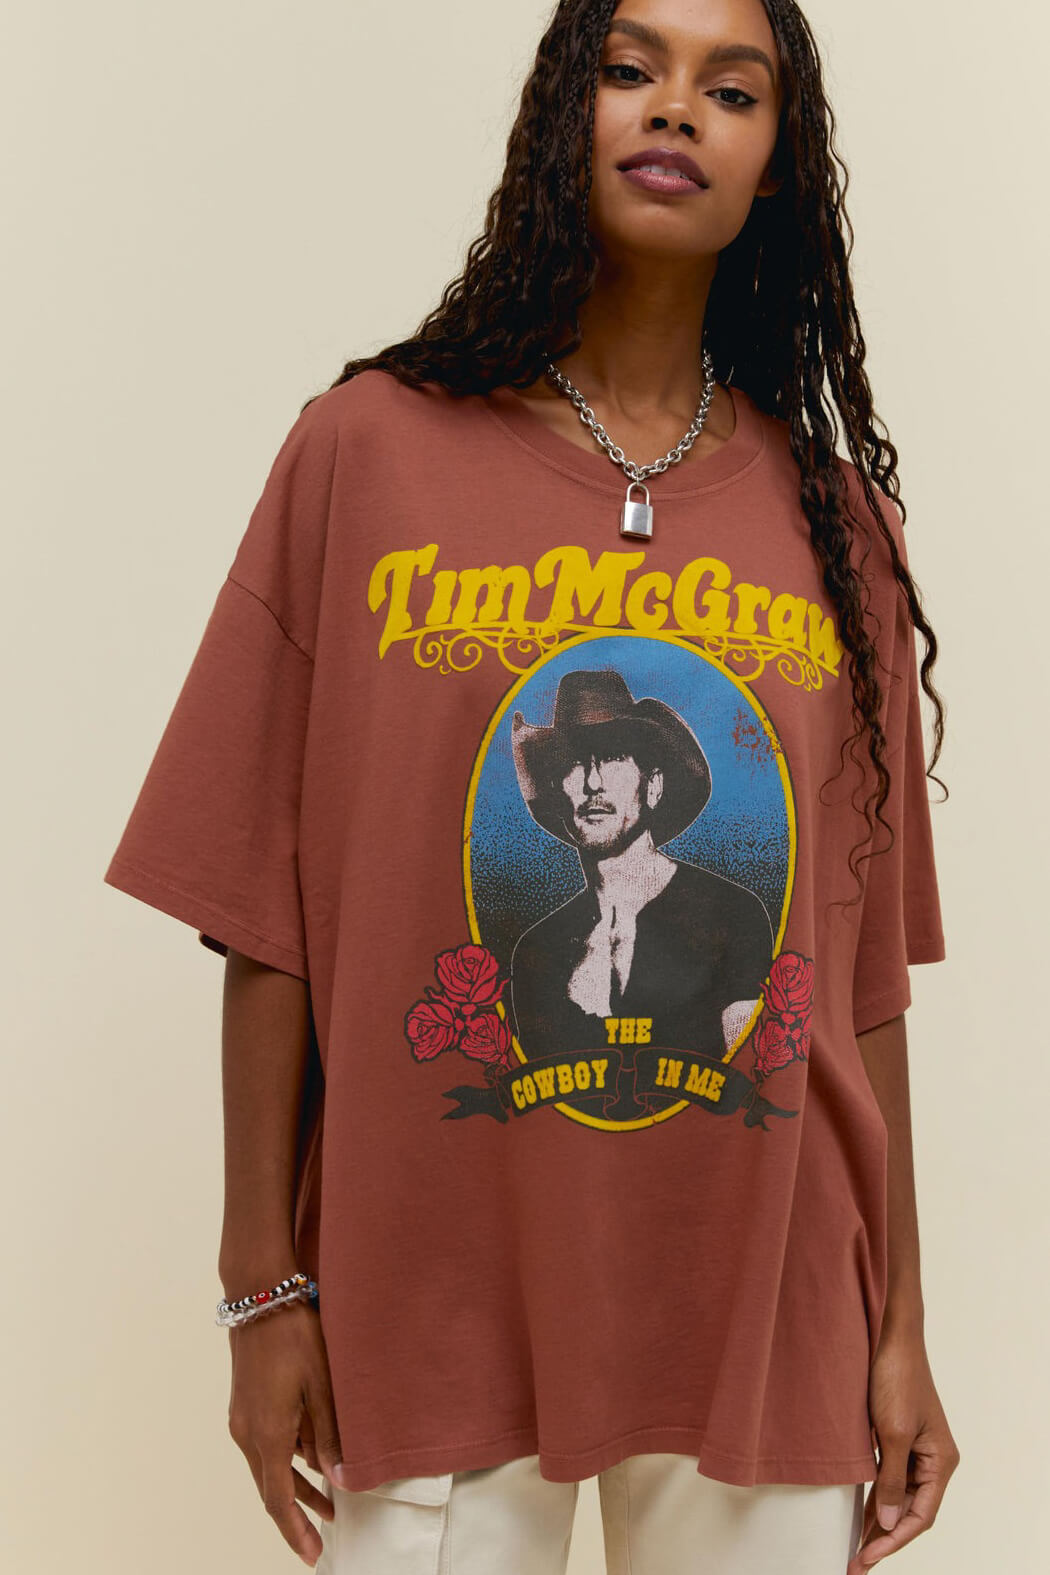 Daydreamer Tim McGraw the Cowboy in me tee